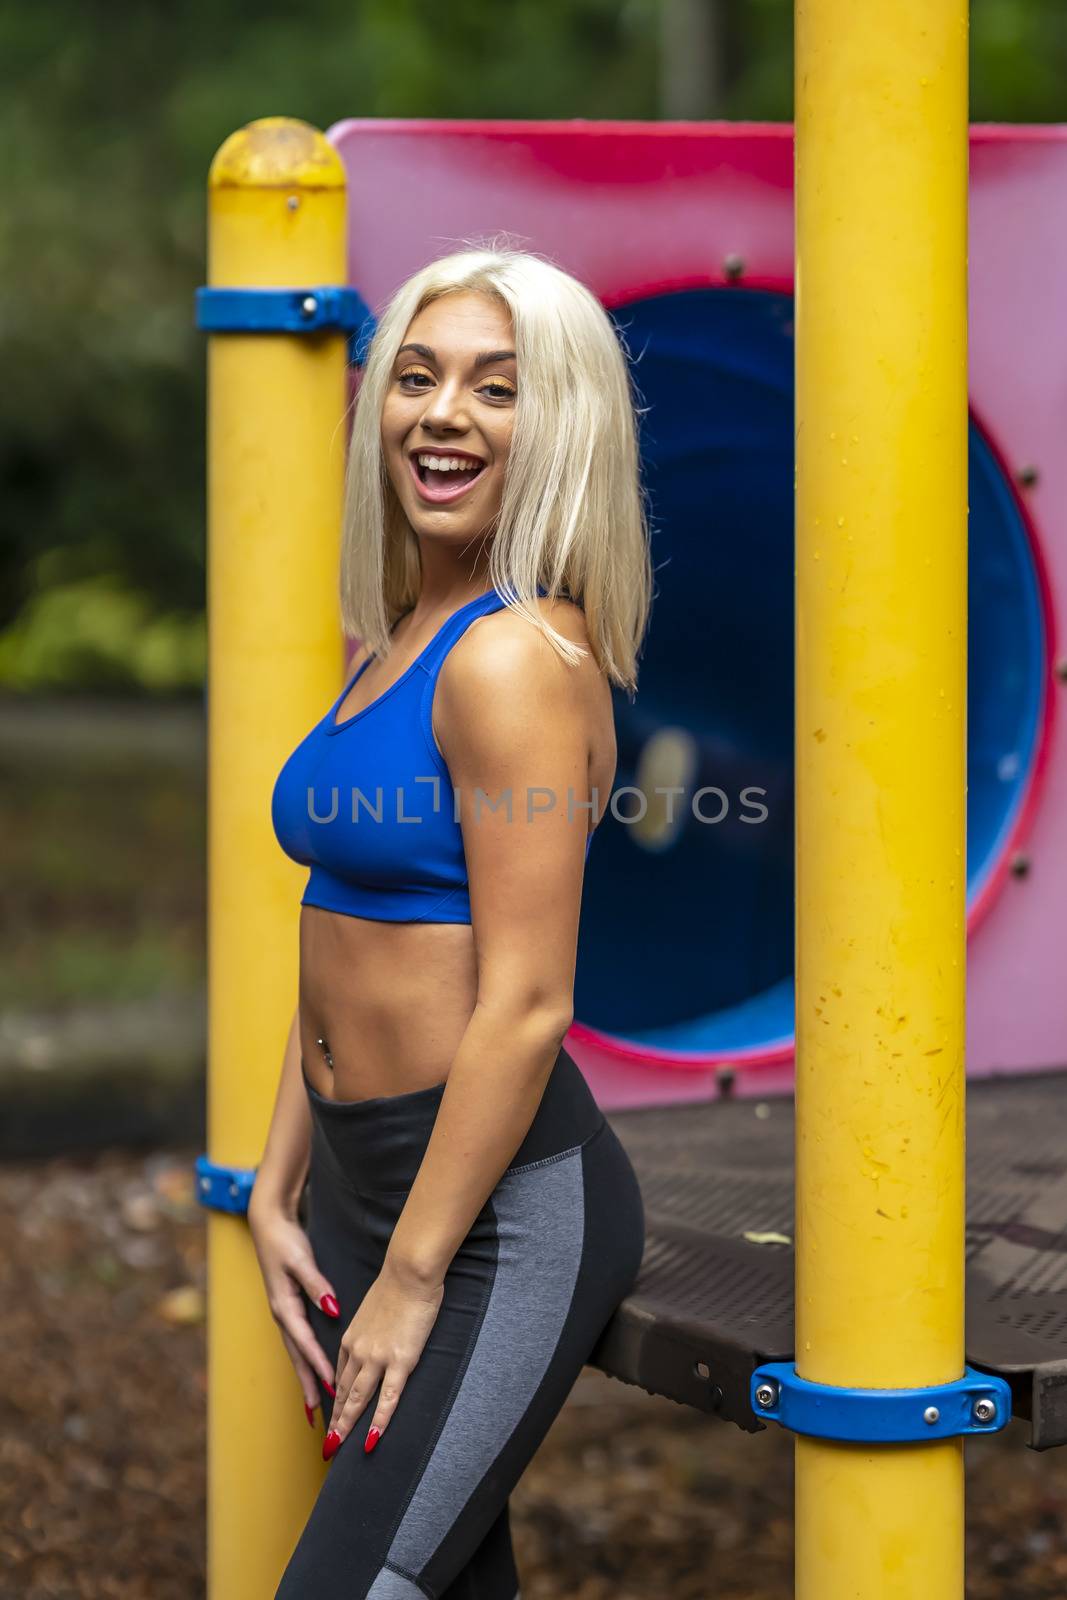 A Young Lovely Blonde Model Works Out Outdoors While Enjoying A Summers Day by actionsports